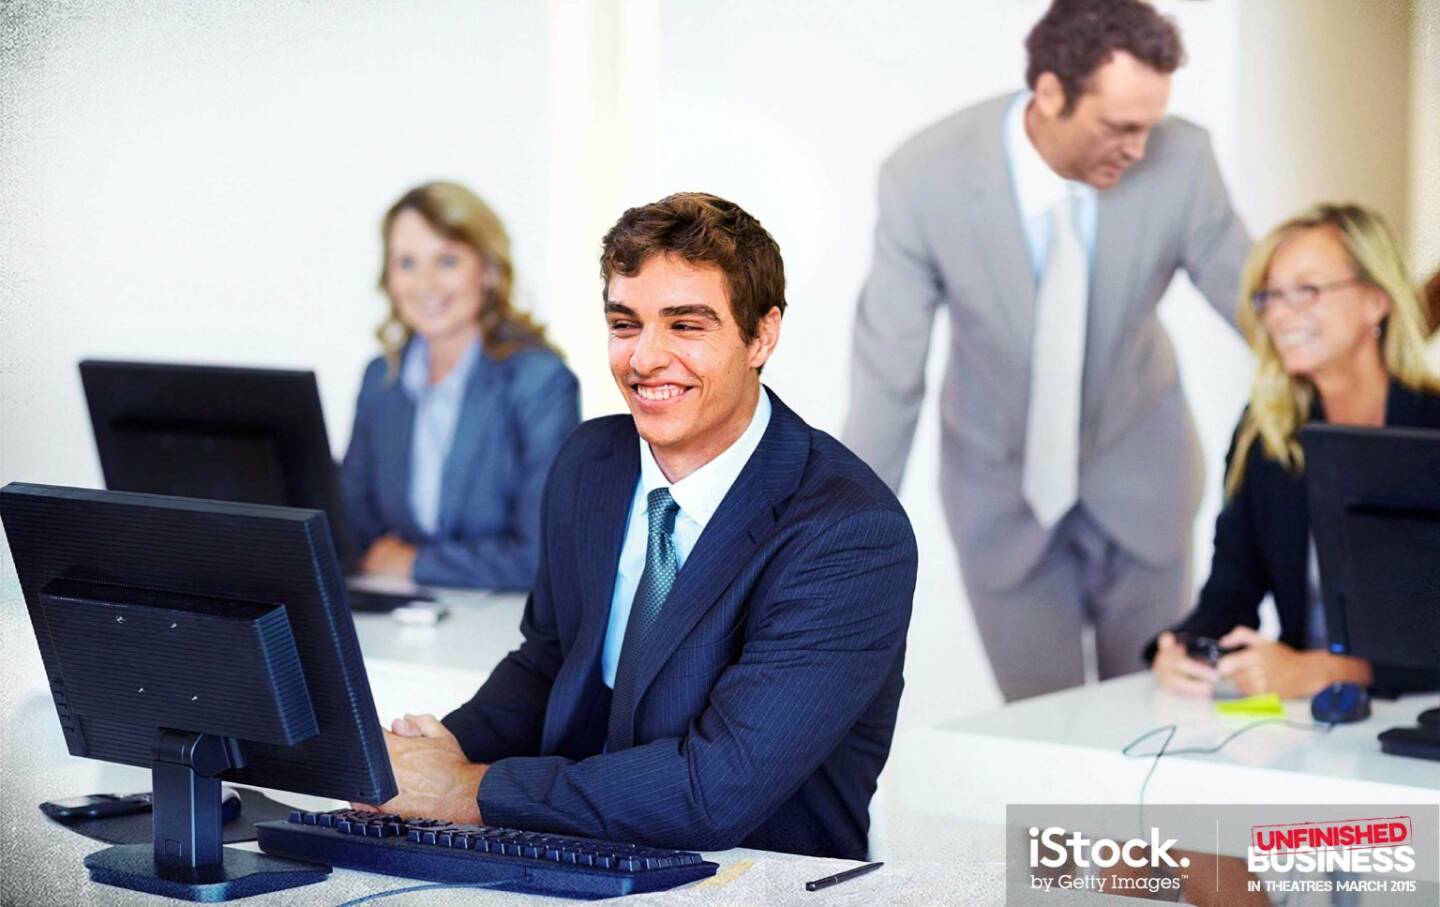 Mike Pancake and Dan Trunkman (Vince Vaughn) are supportive businessmen - Smiling business man sitting at his computer desk, iStock, Getty Images